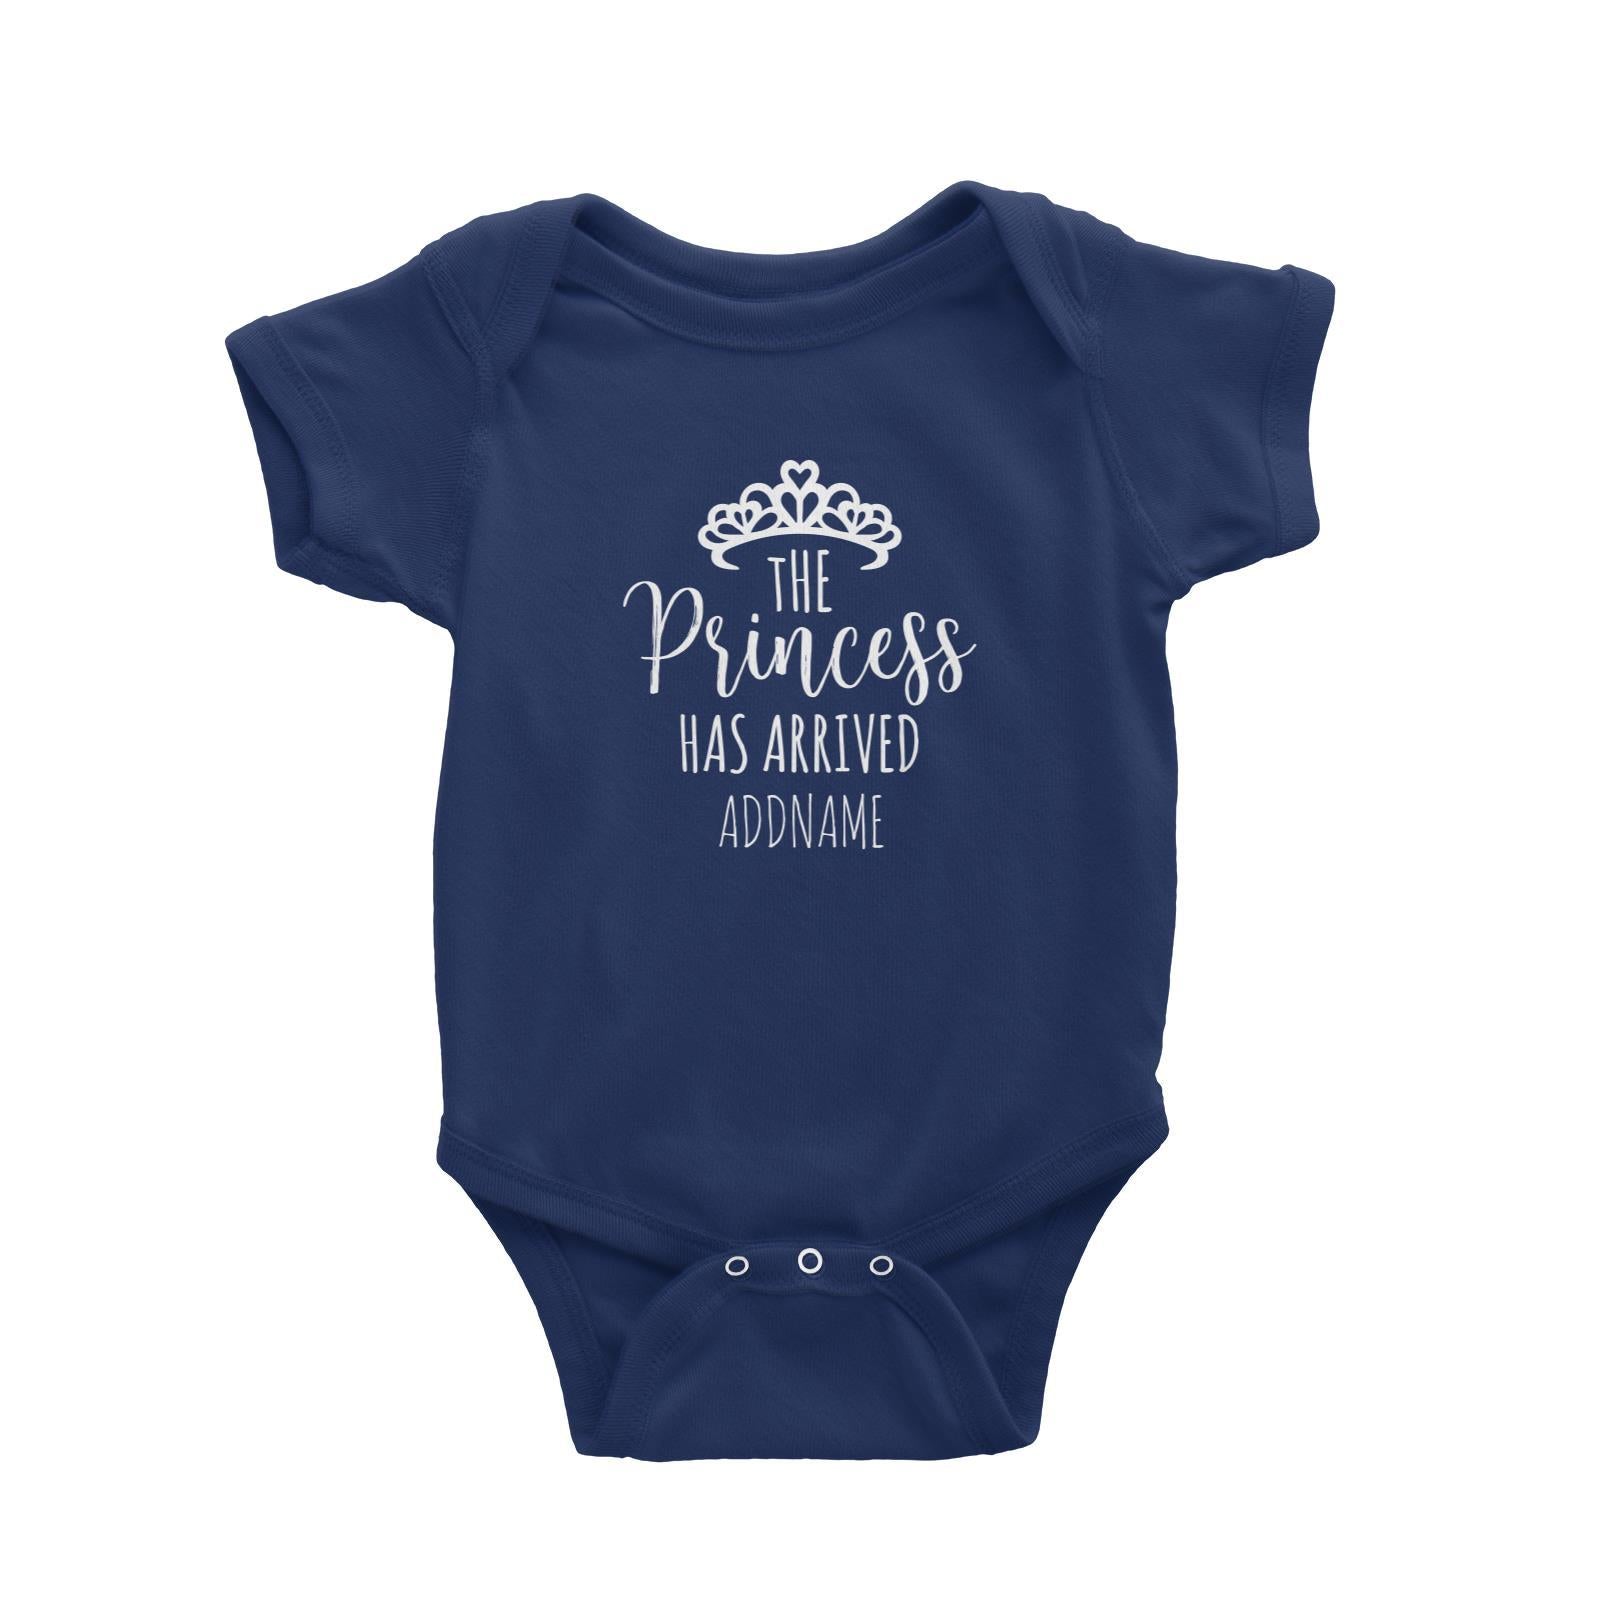 The Princess Has Arrived with Tiara Addname Baby Romper